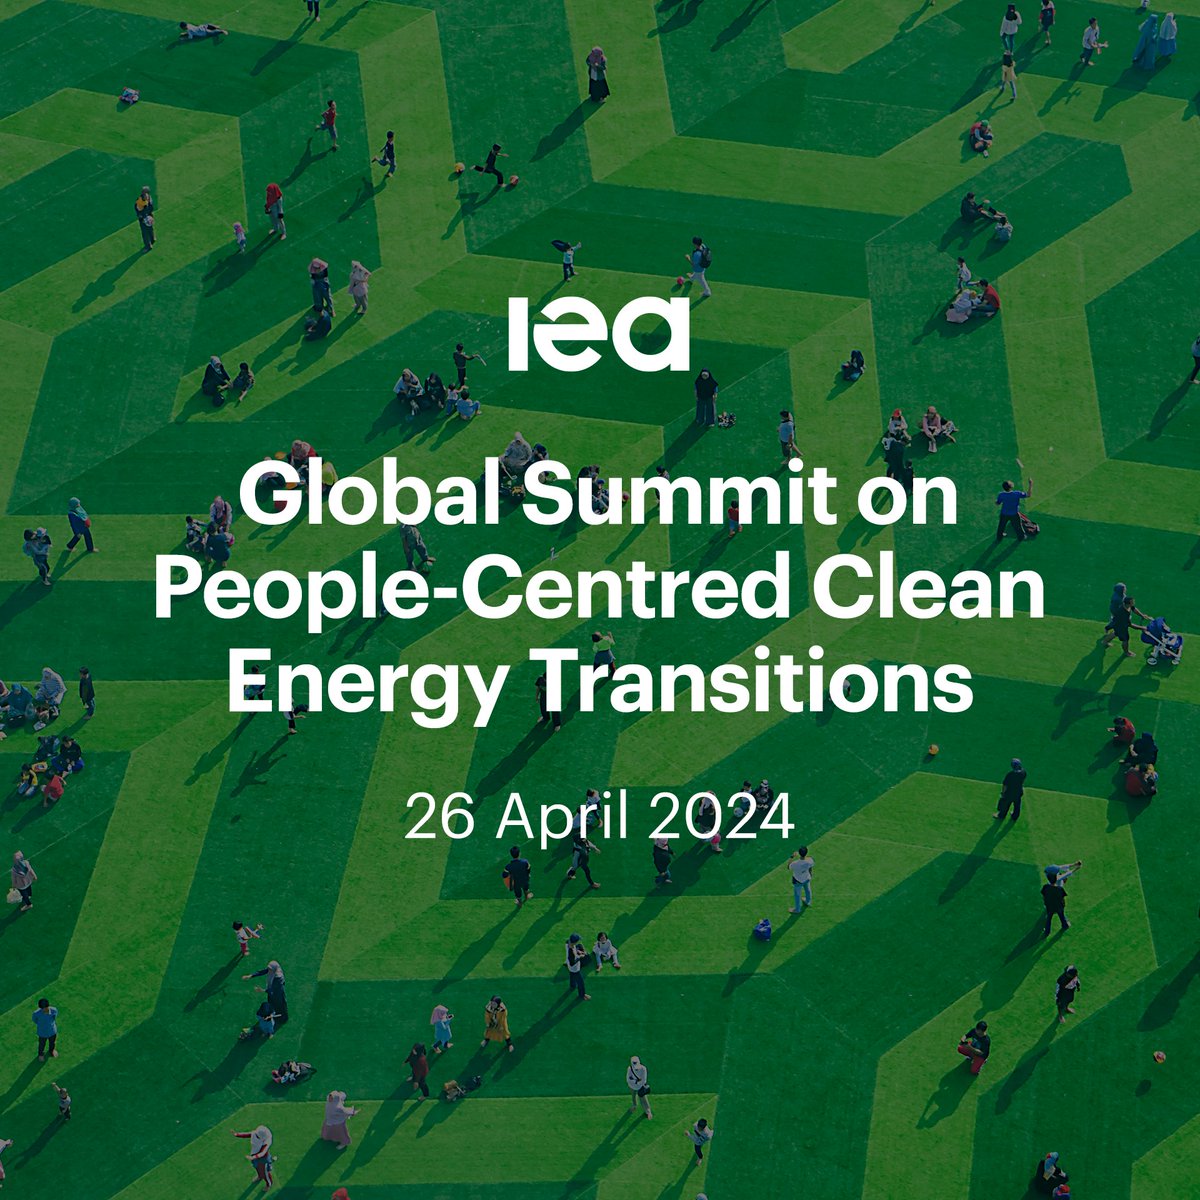 We're delighted to take part in @IEA’s first-ever Global Summit on People-Centered Clean Energy Transitions! Watch the session on #AdvancingGenderEquality at 11:35 CEST here 👉iea.org/events/advanci…